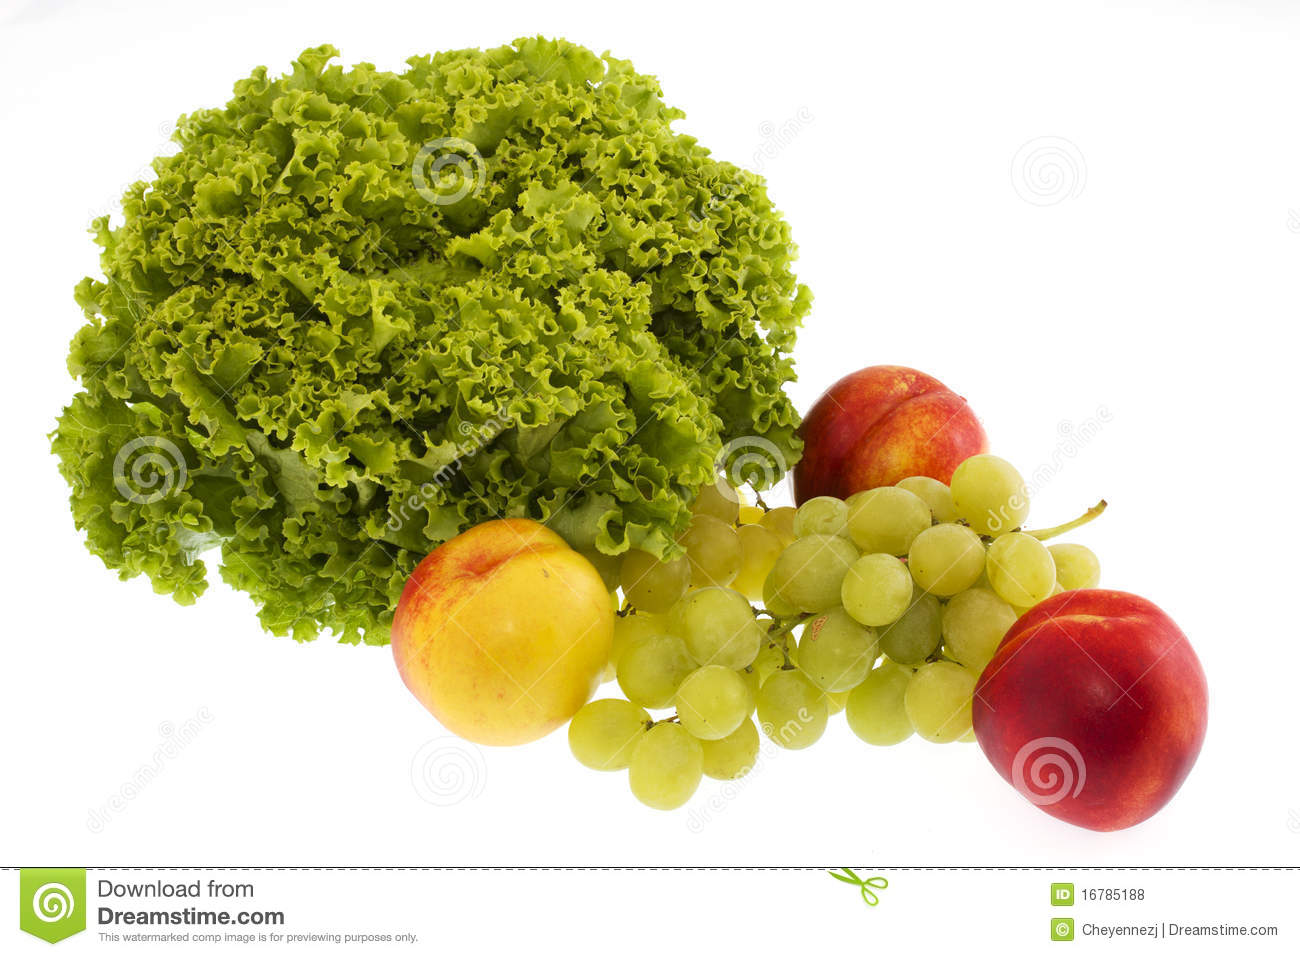 Free Images of Nutritious Foods